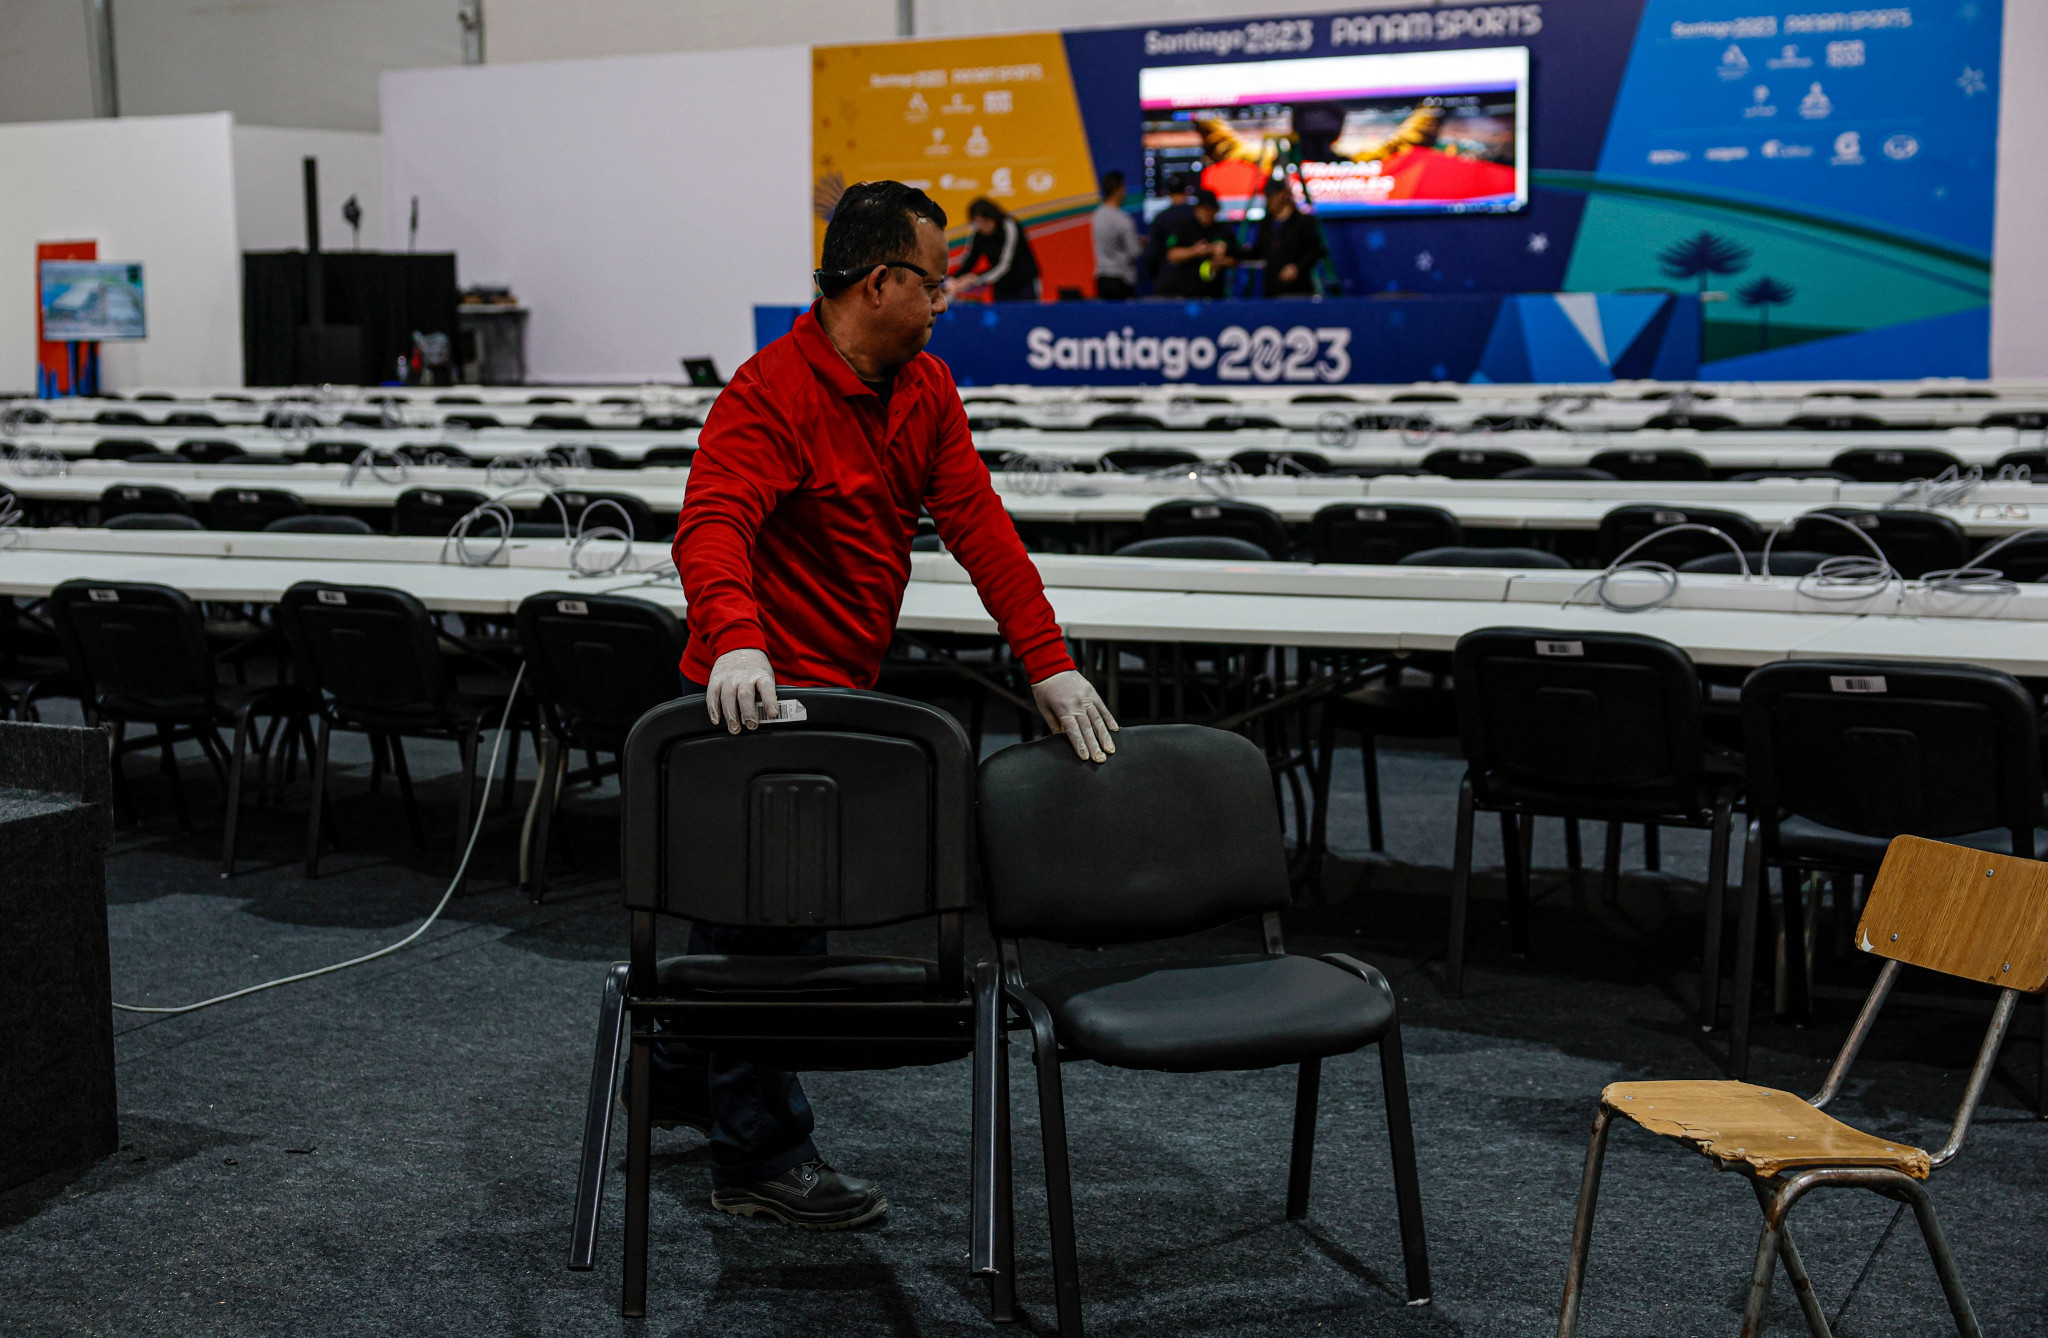 Main press centre opens in build-up to Santiago 2023 Pan American Games